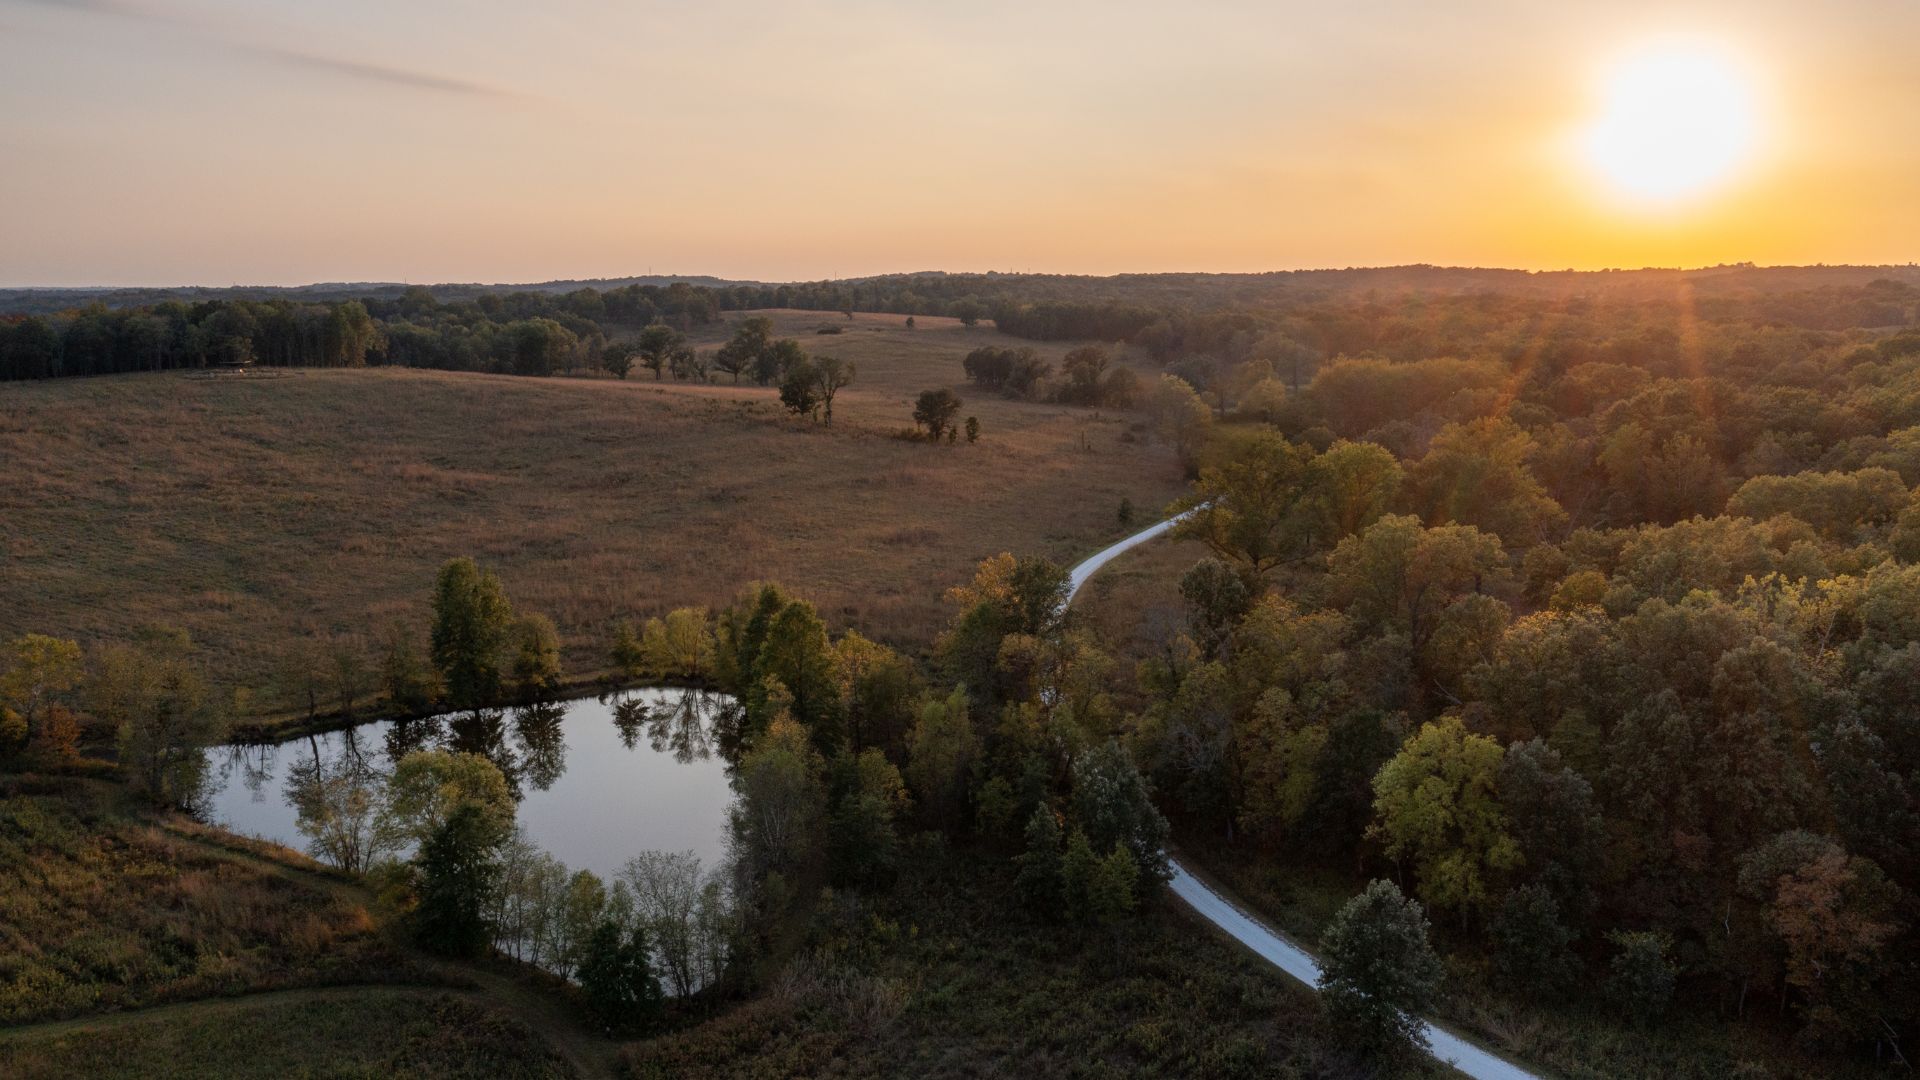 The sun sets over Shaw Nature Reserve, one of the best places for outdoor recreation in St. Louis.